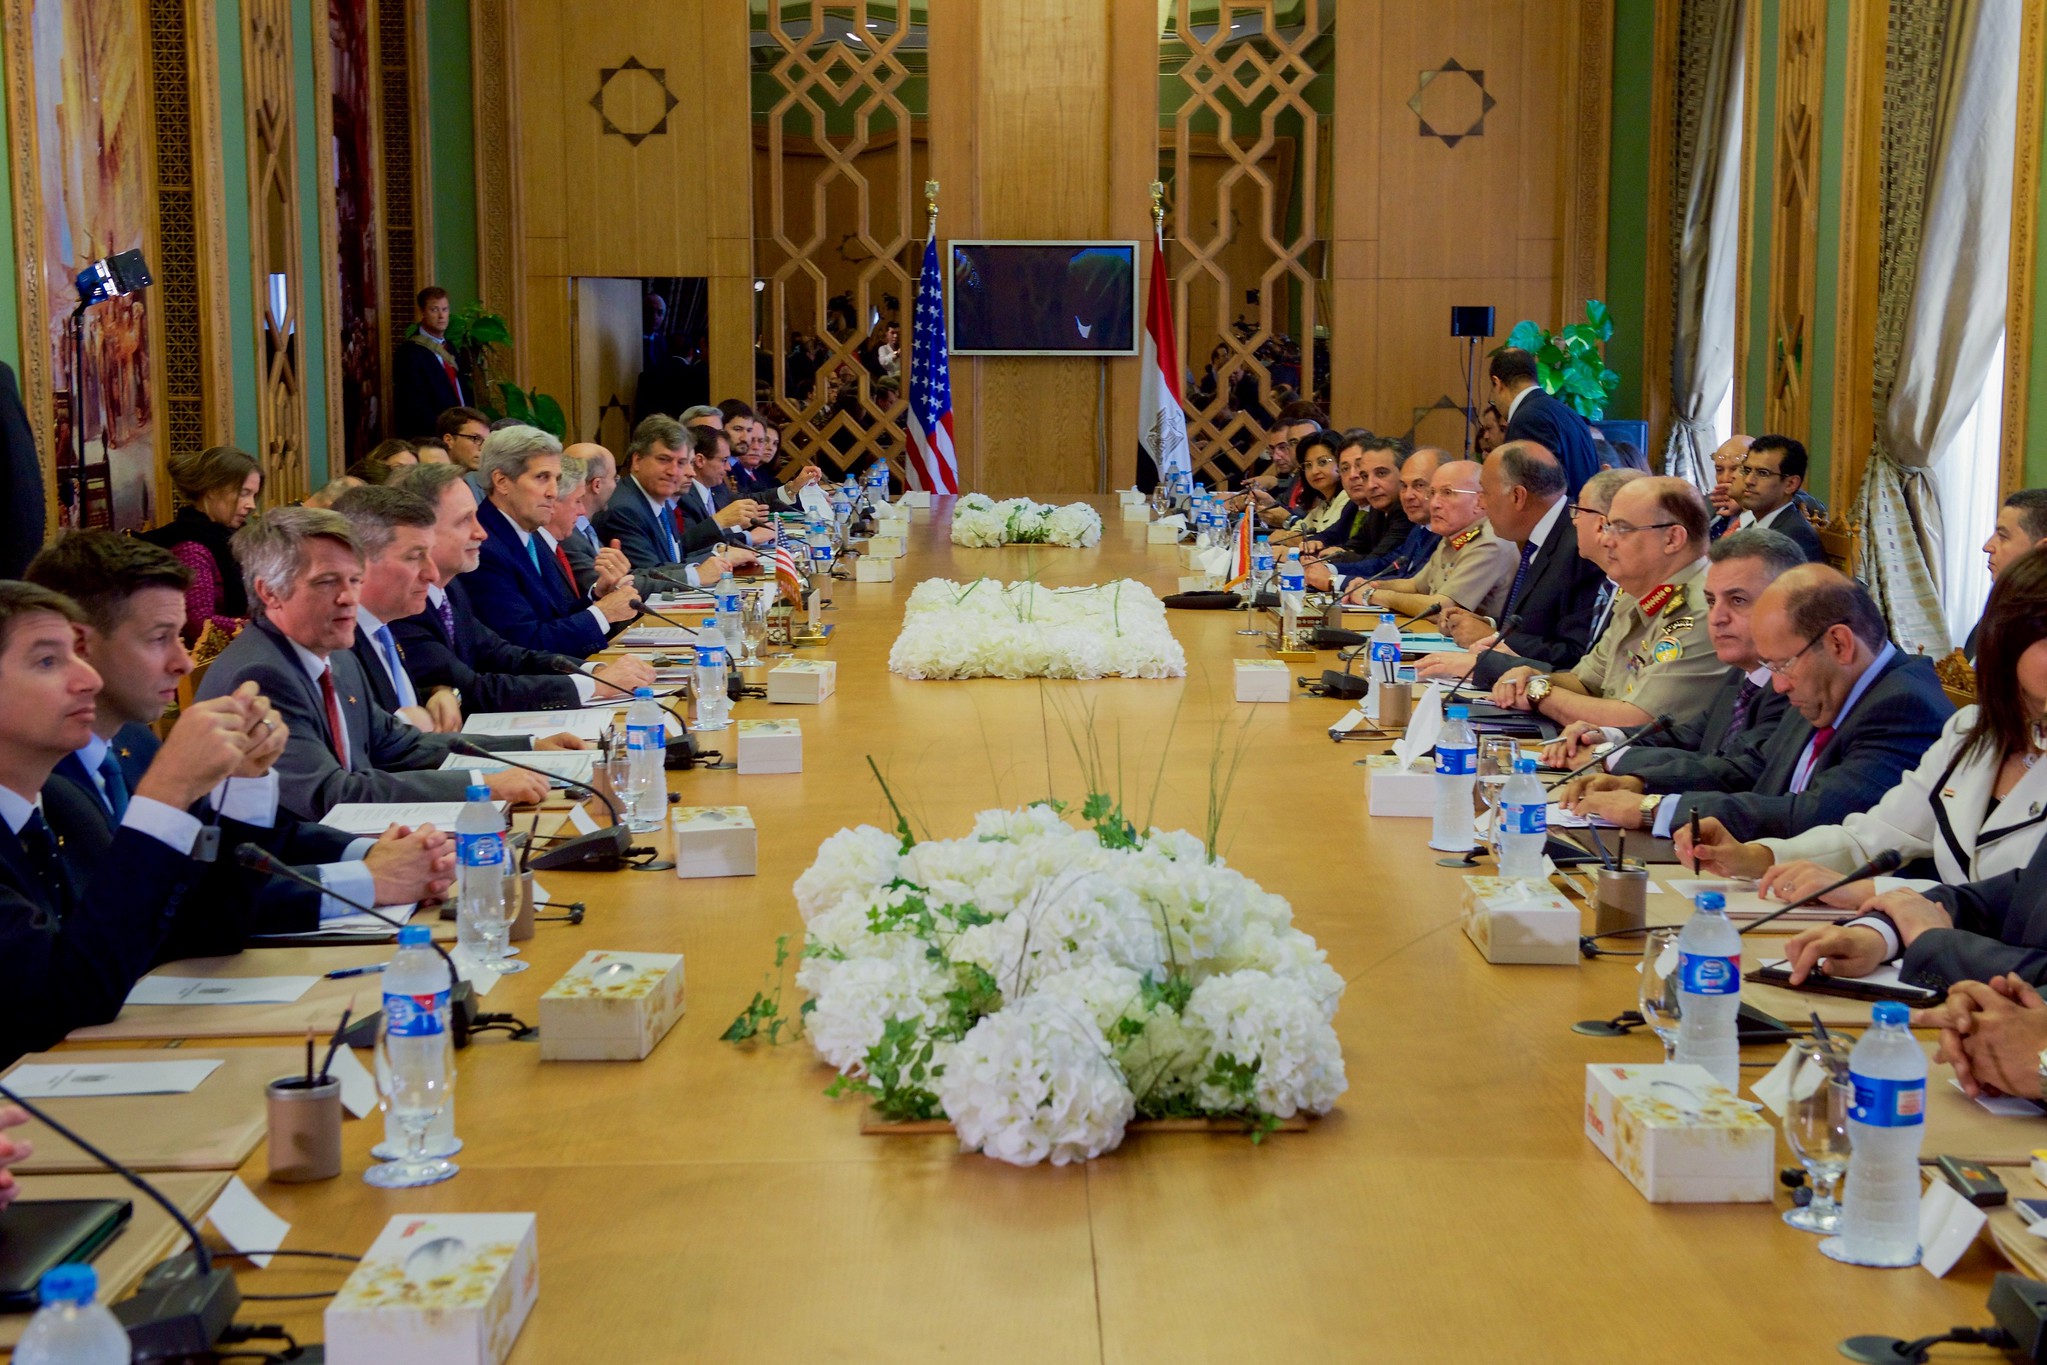 Secretary Kerry and U.S. Delegation Meet With Egyptian Counterparts At Outset of Strategic Dialogue Between Two Countries in Cairo